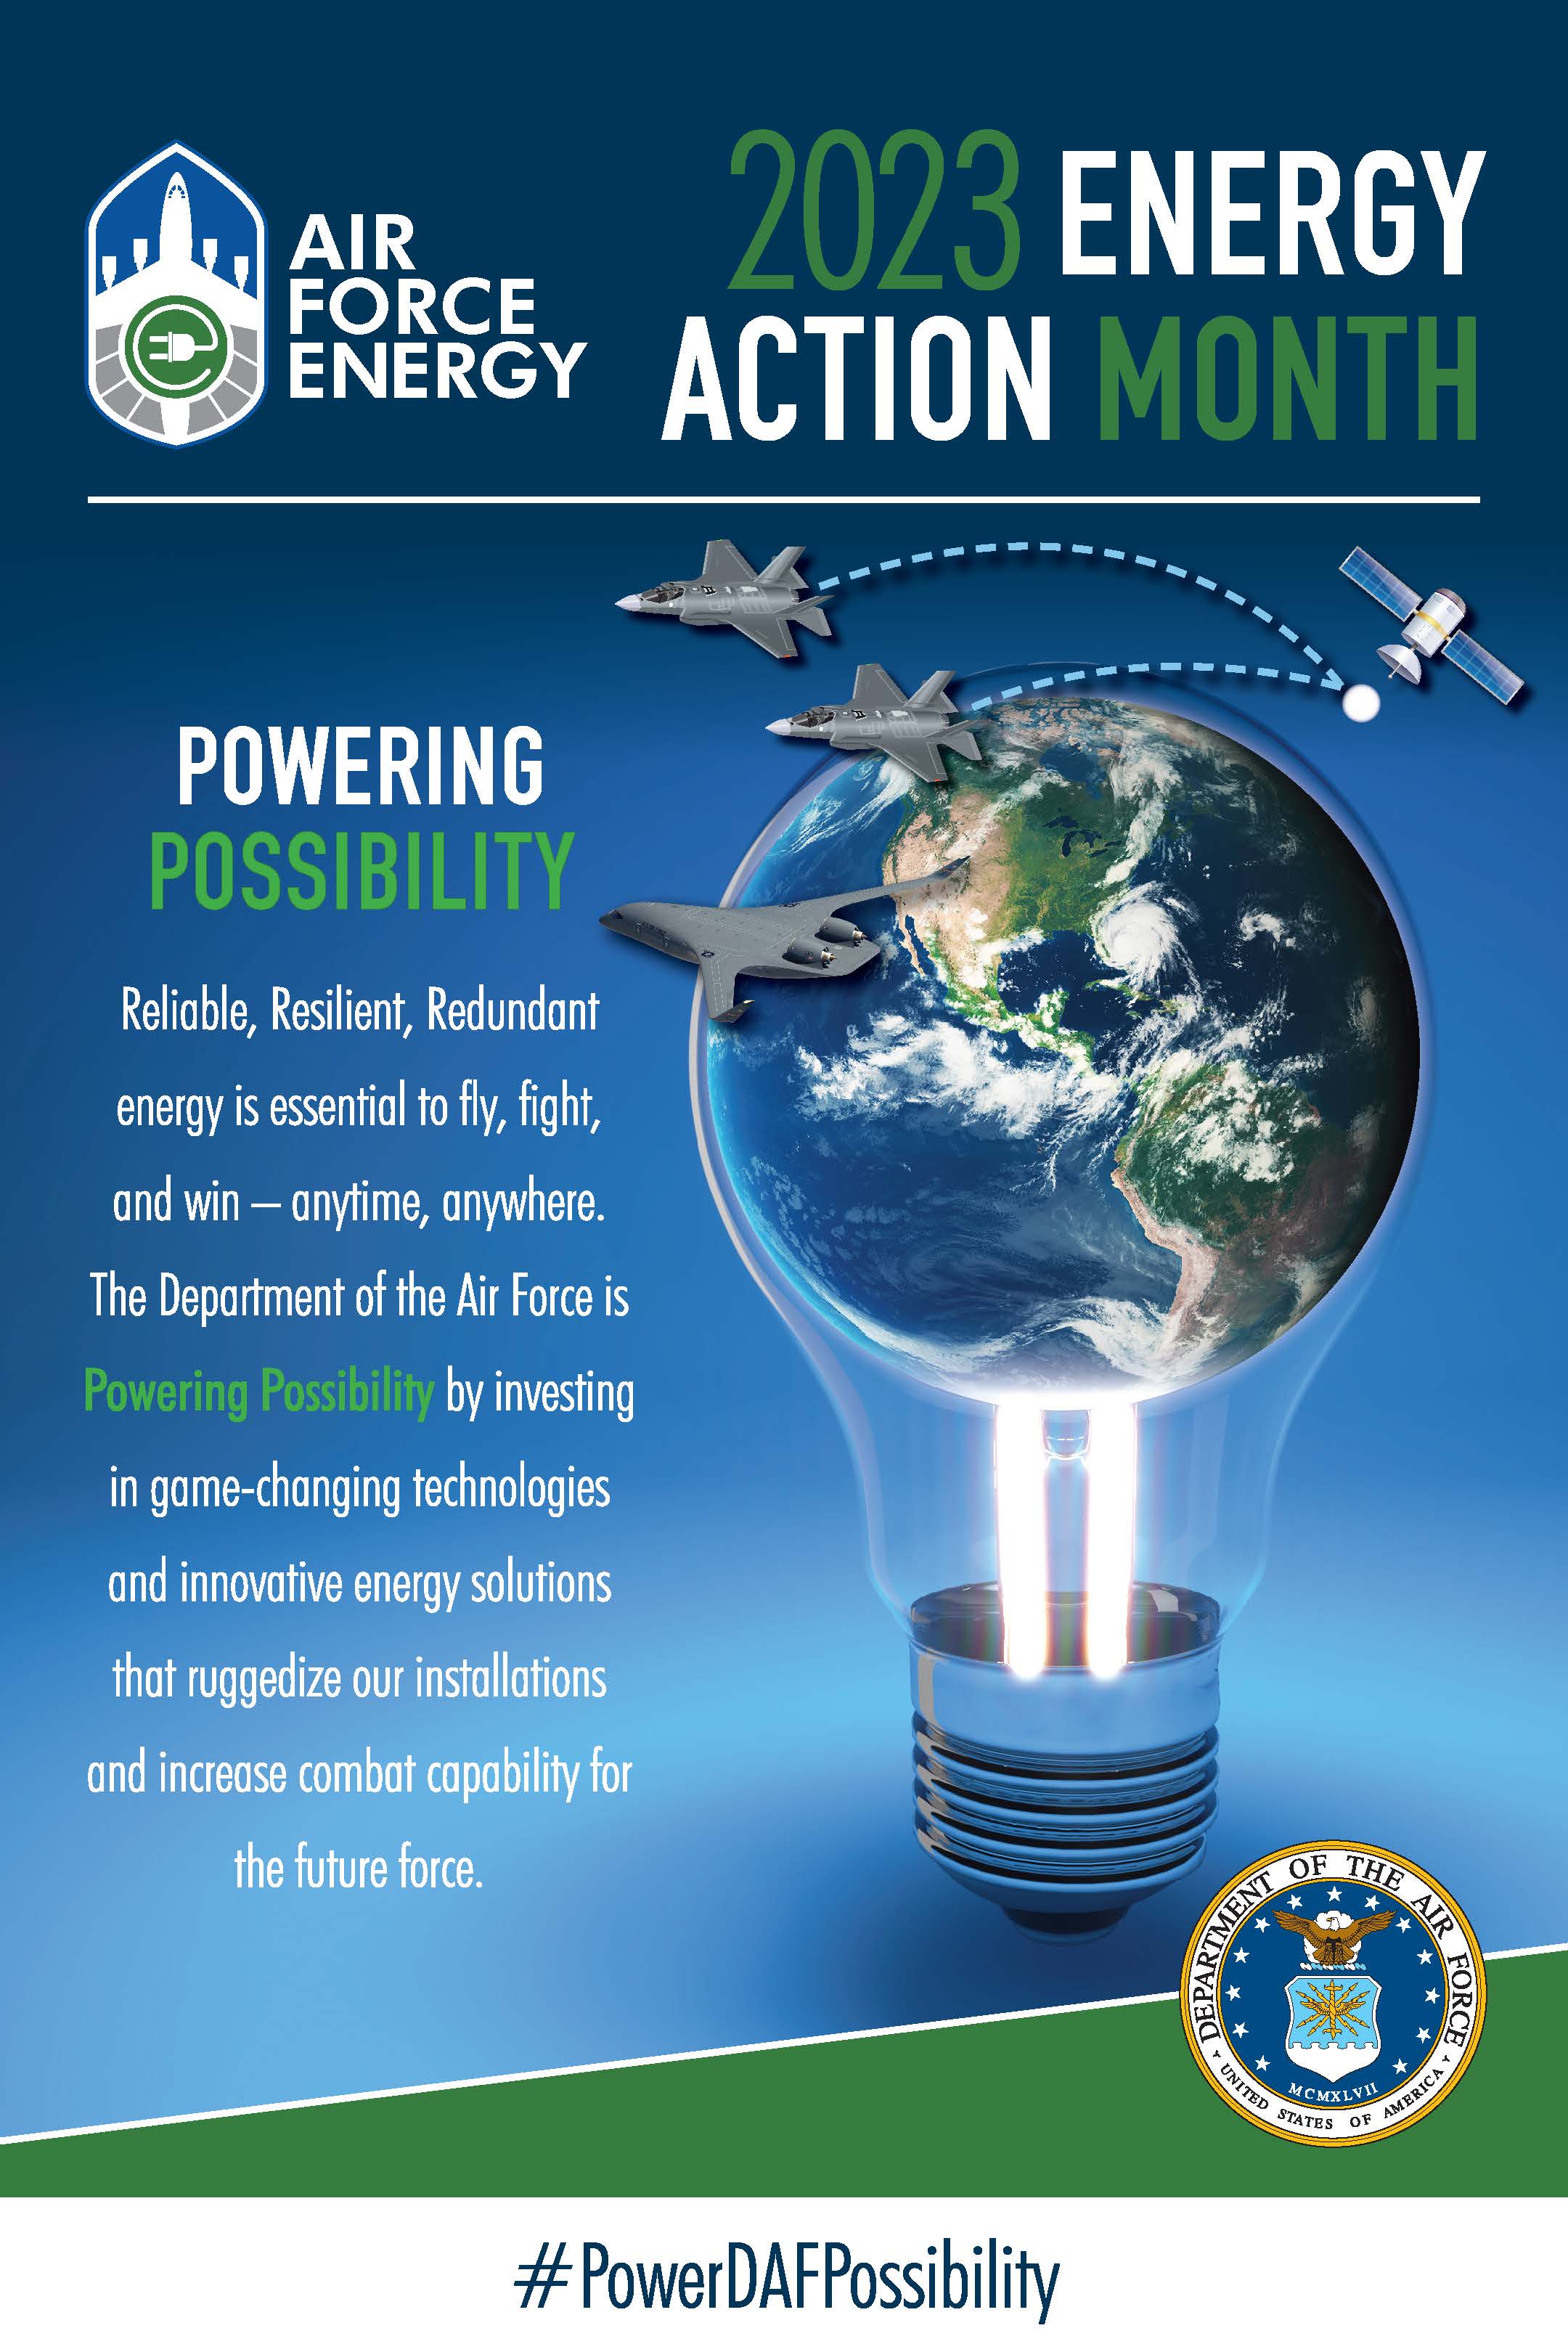 Planes Flying over a globe in Energy Action Month Poster 